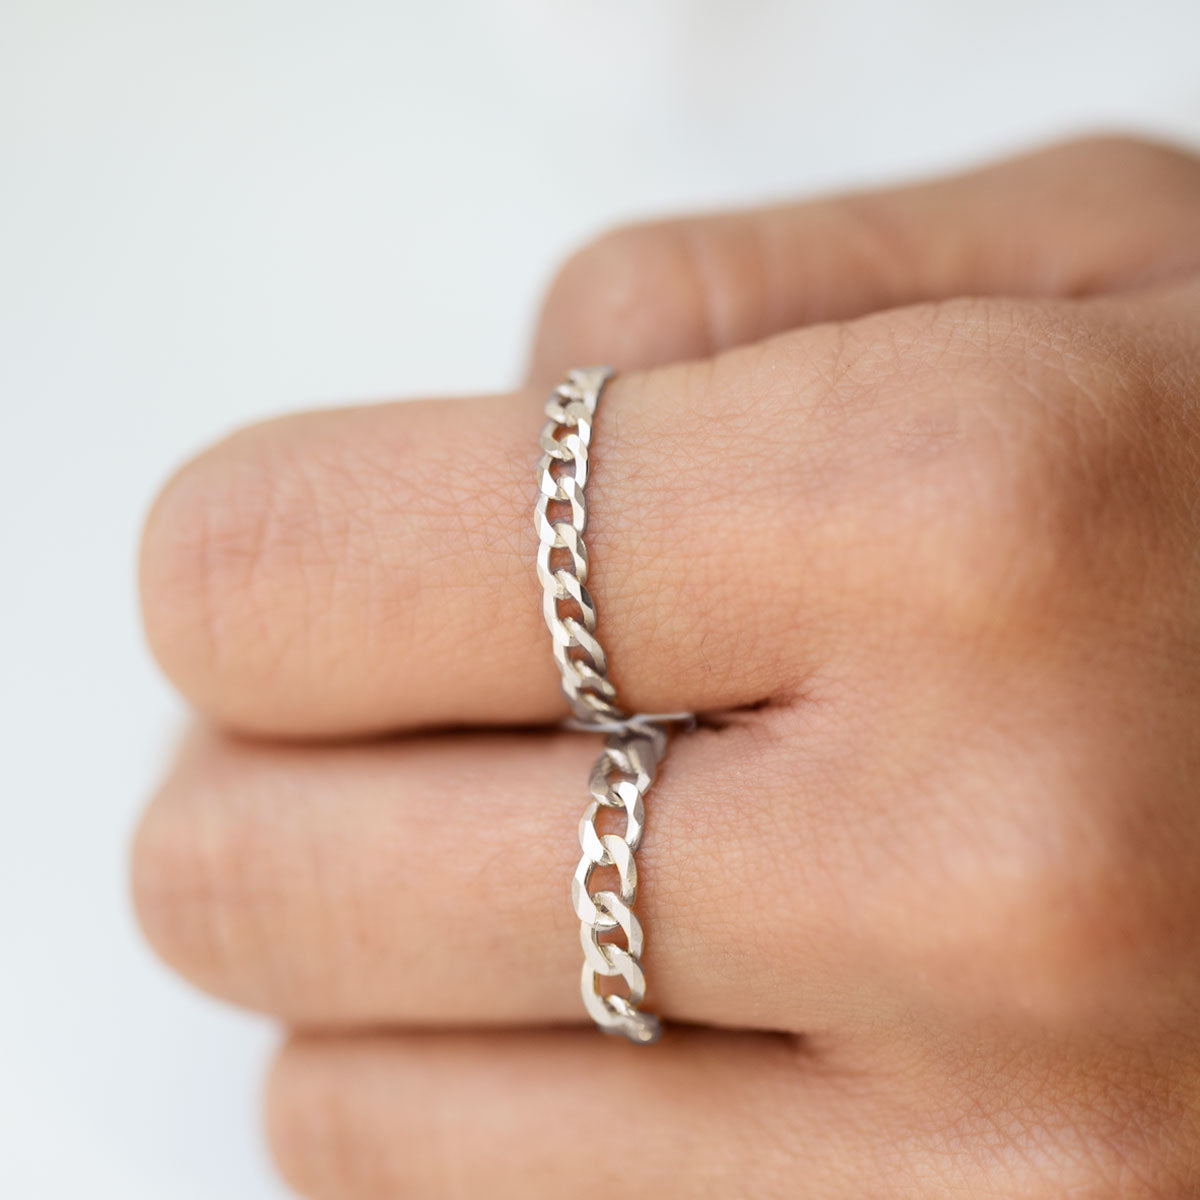 Silver Curb Chain Rings in different sizes